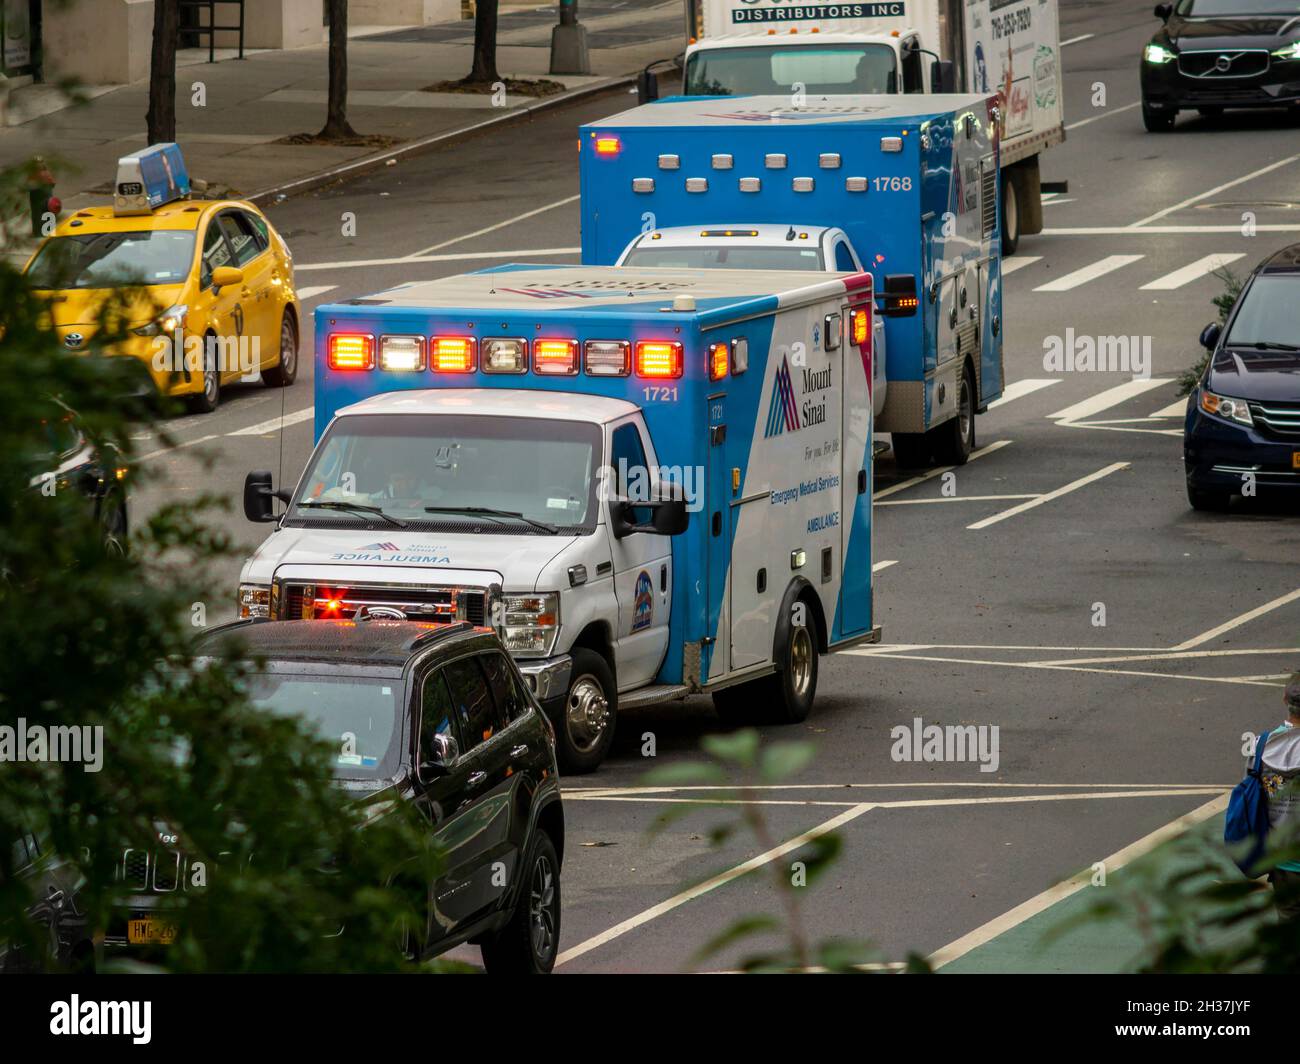 Mt. Sinai ambulances, part of the New York City 911 system, parked in the Chelsea neighborhood of New York on Tuesday, May 5, 2021. (© Richard B. Levine) Stock Photo